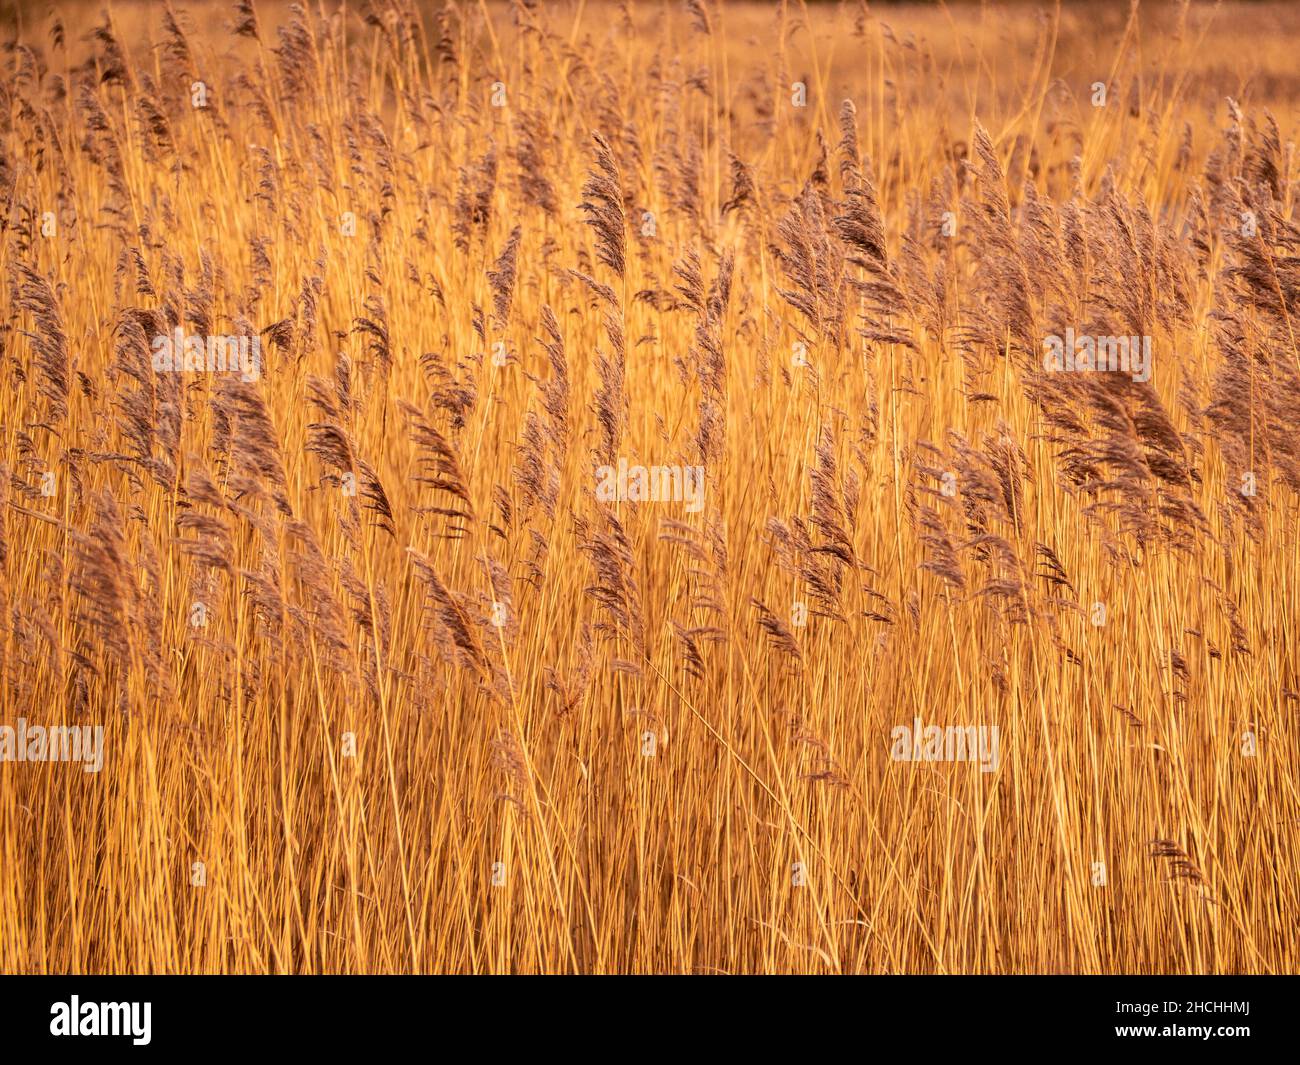 Golden winter reeds in a dense reed bed Stock Photo